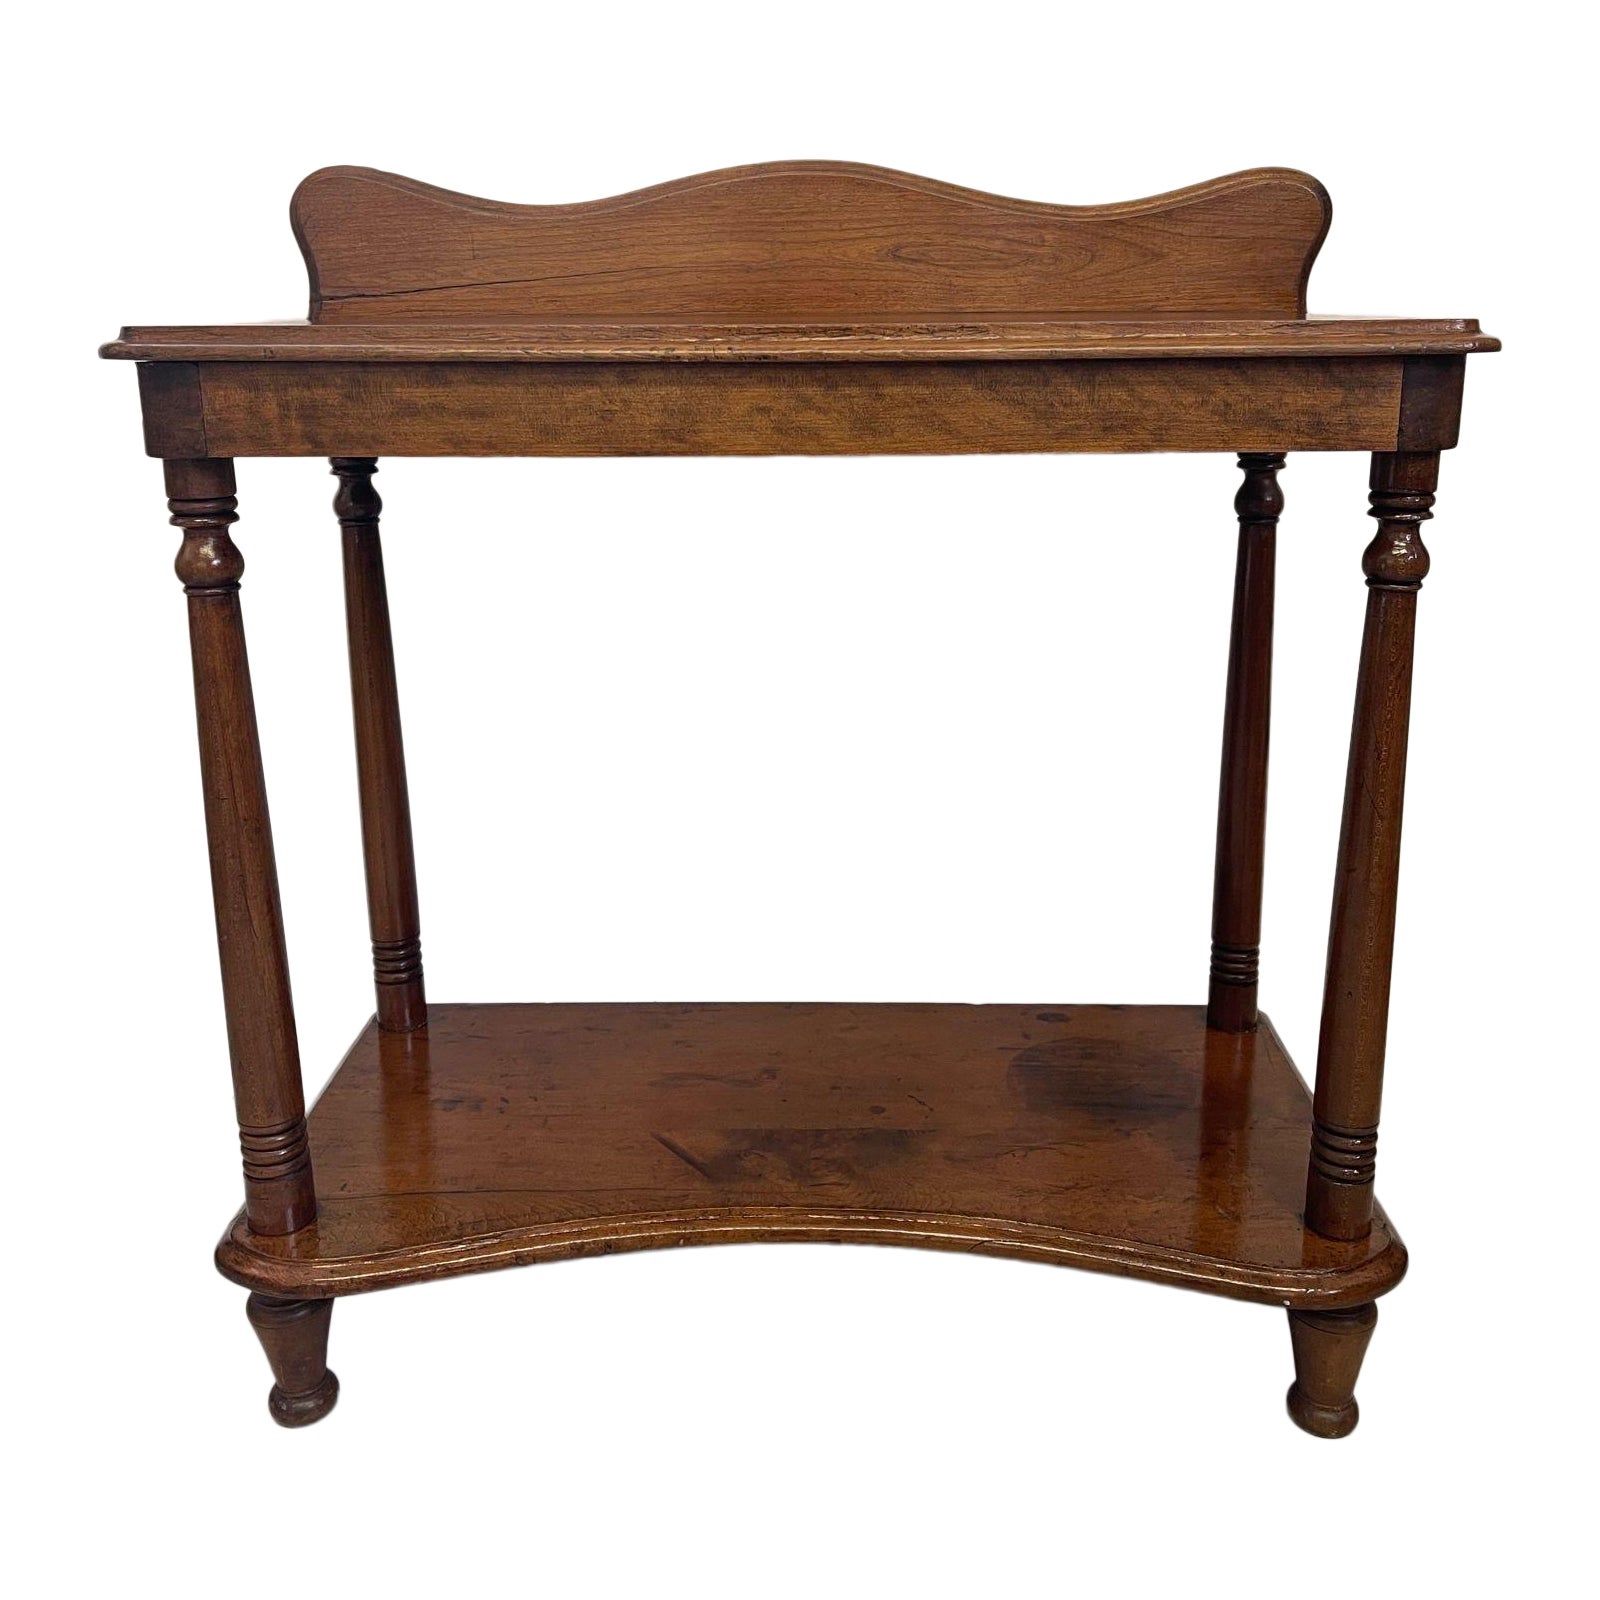 Antique Wooden Console Side Table With Turned Legs. For Sale